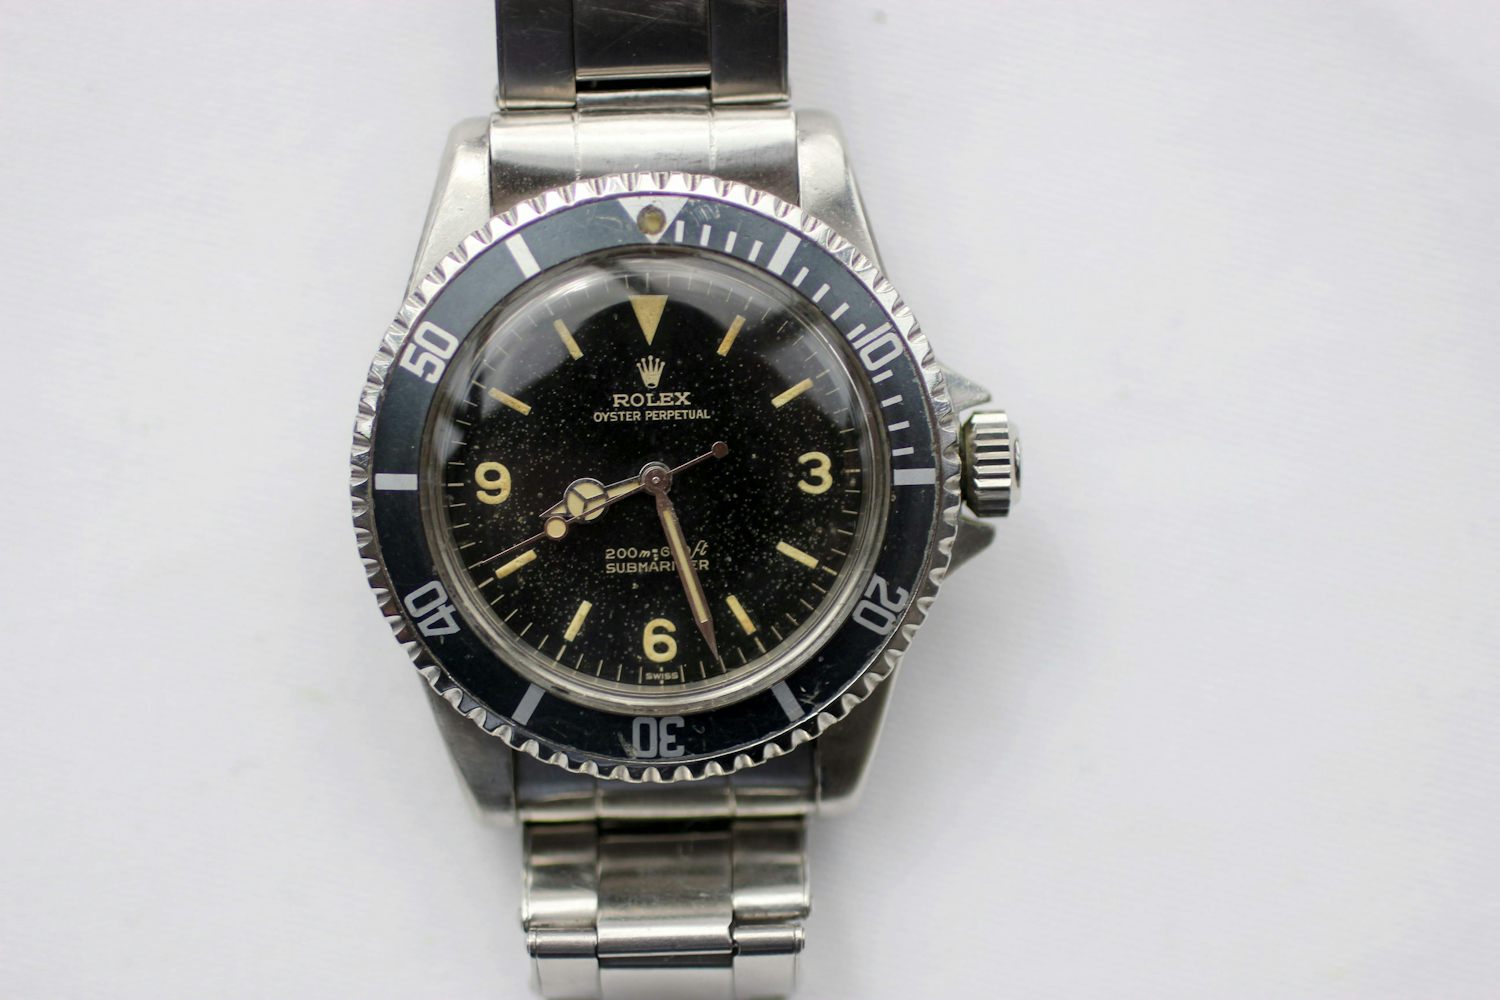 Rolex Submariner Reference 5513 With Explorer Dial